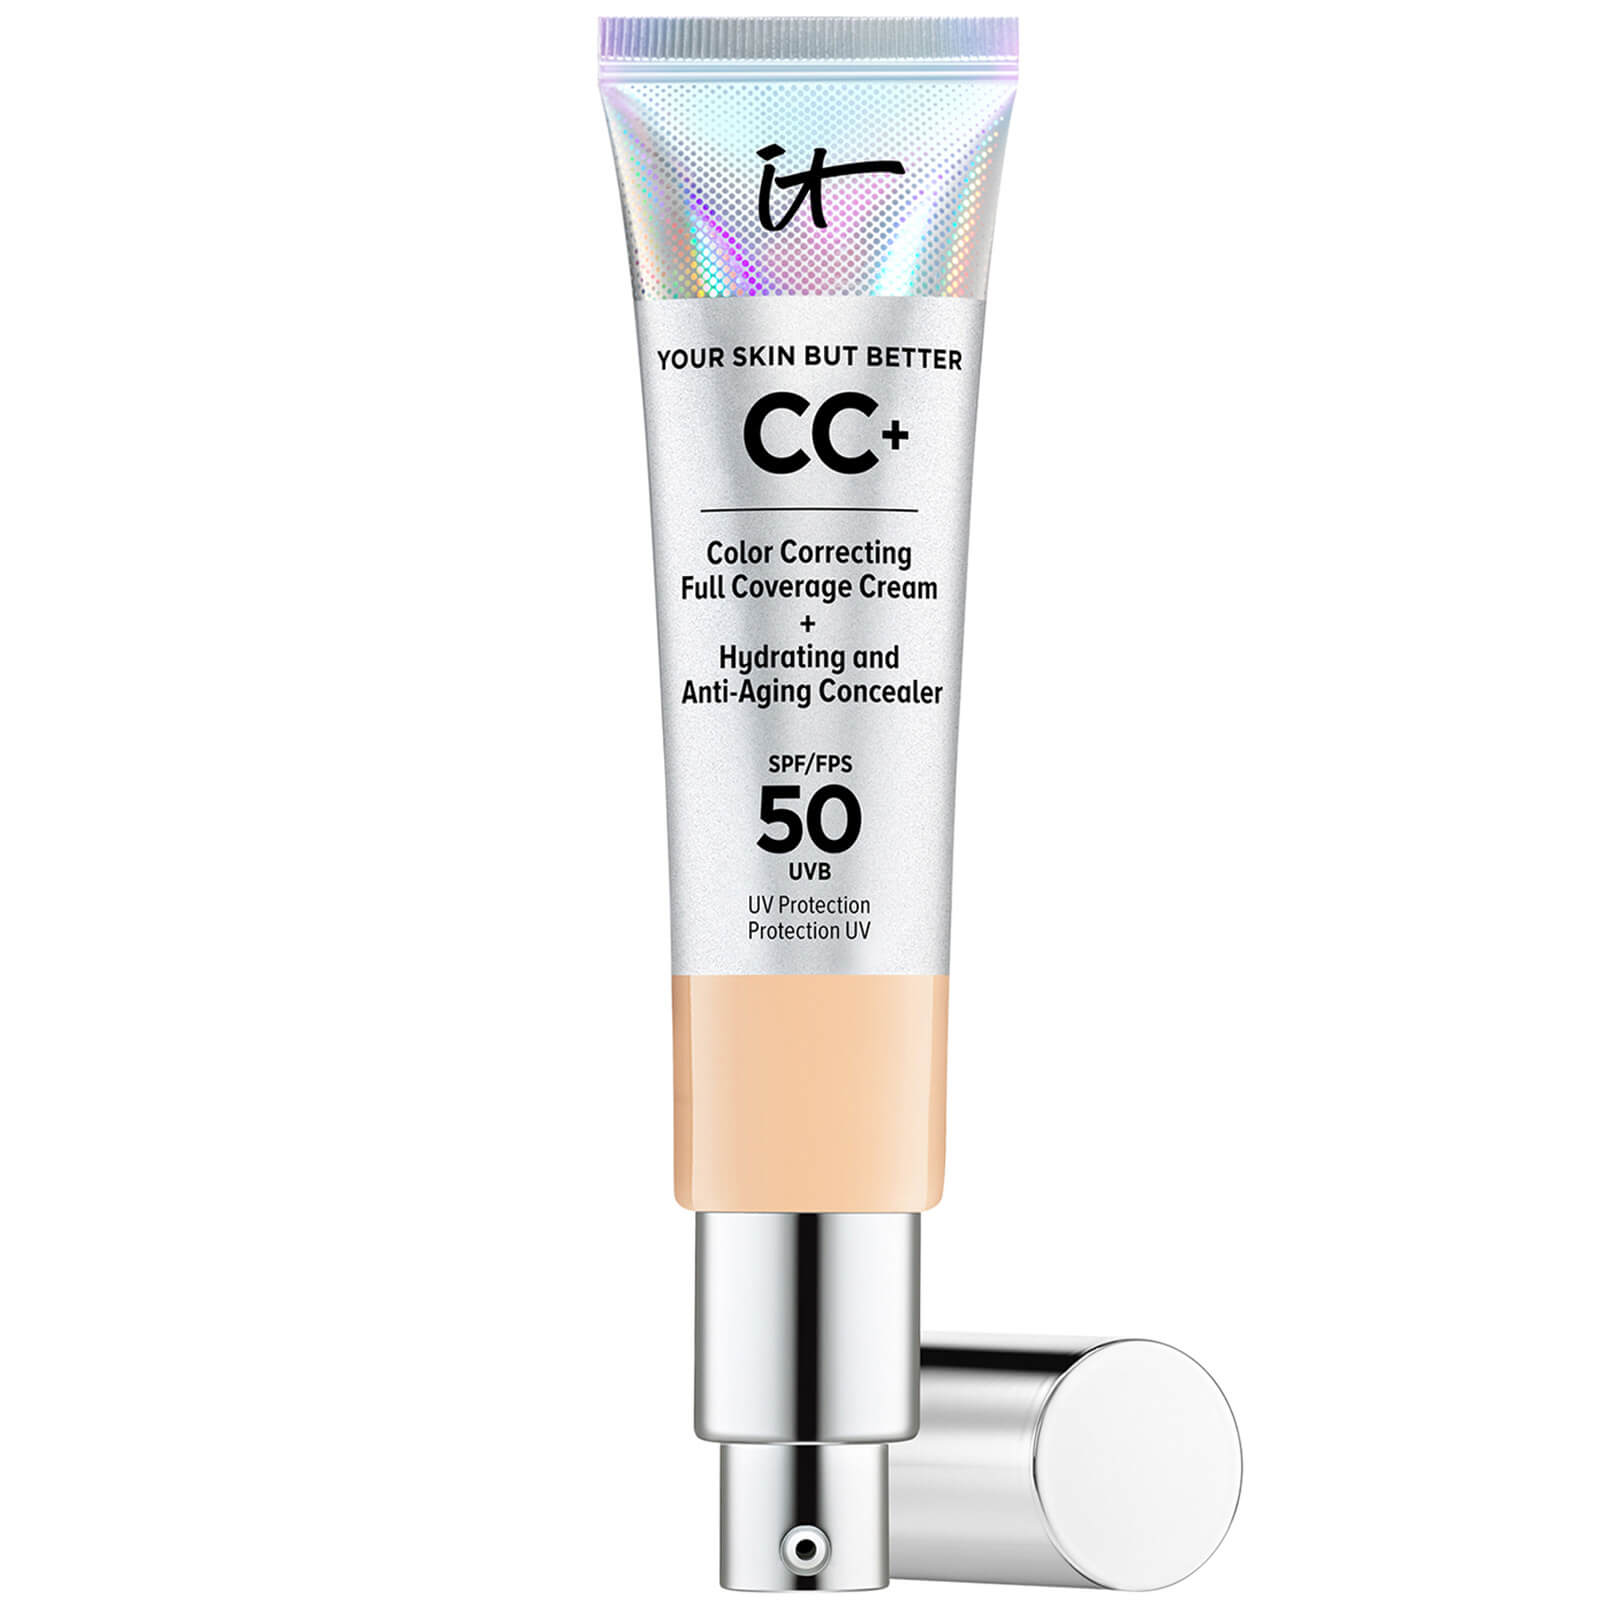 IT Cosmetics Your Skin But Better CC+ Cream with SPF50 32ml (Various Shades) - Light Medium